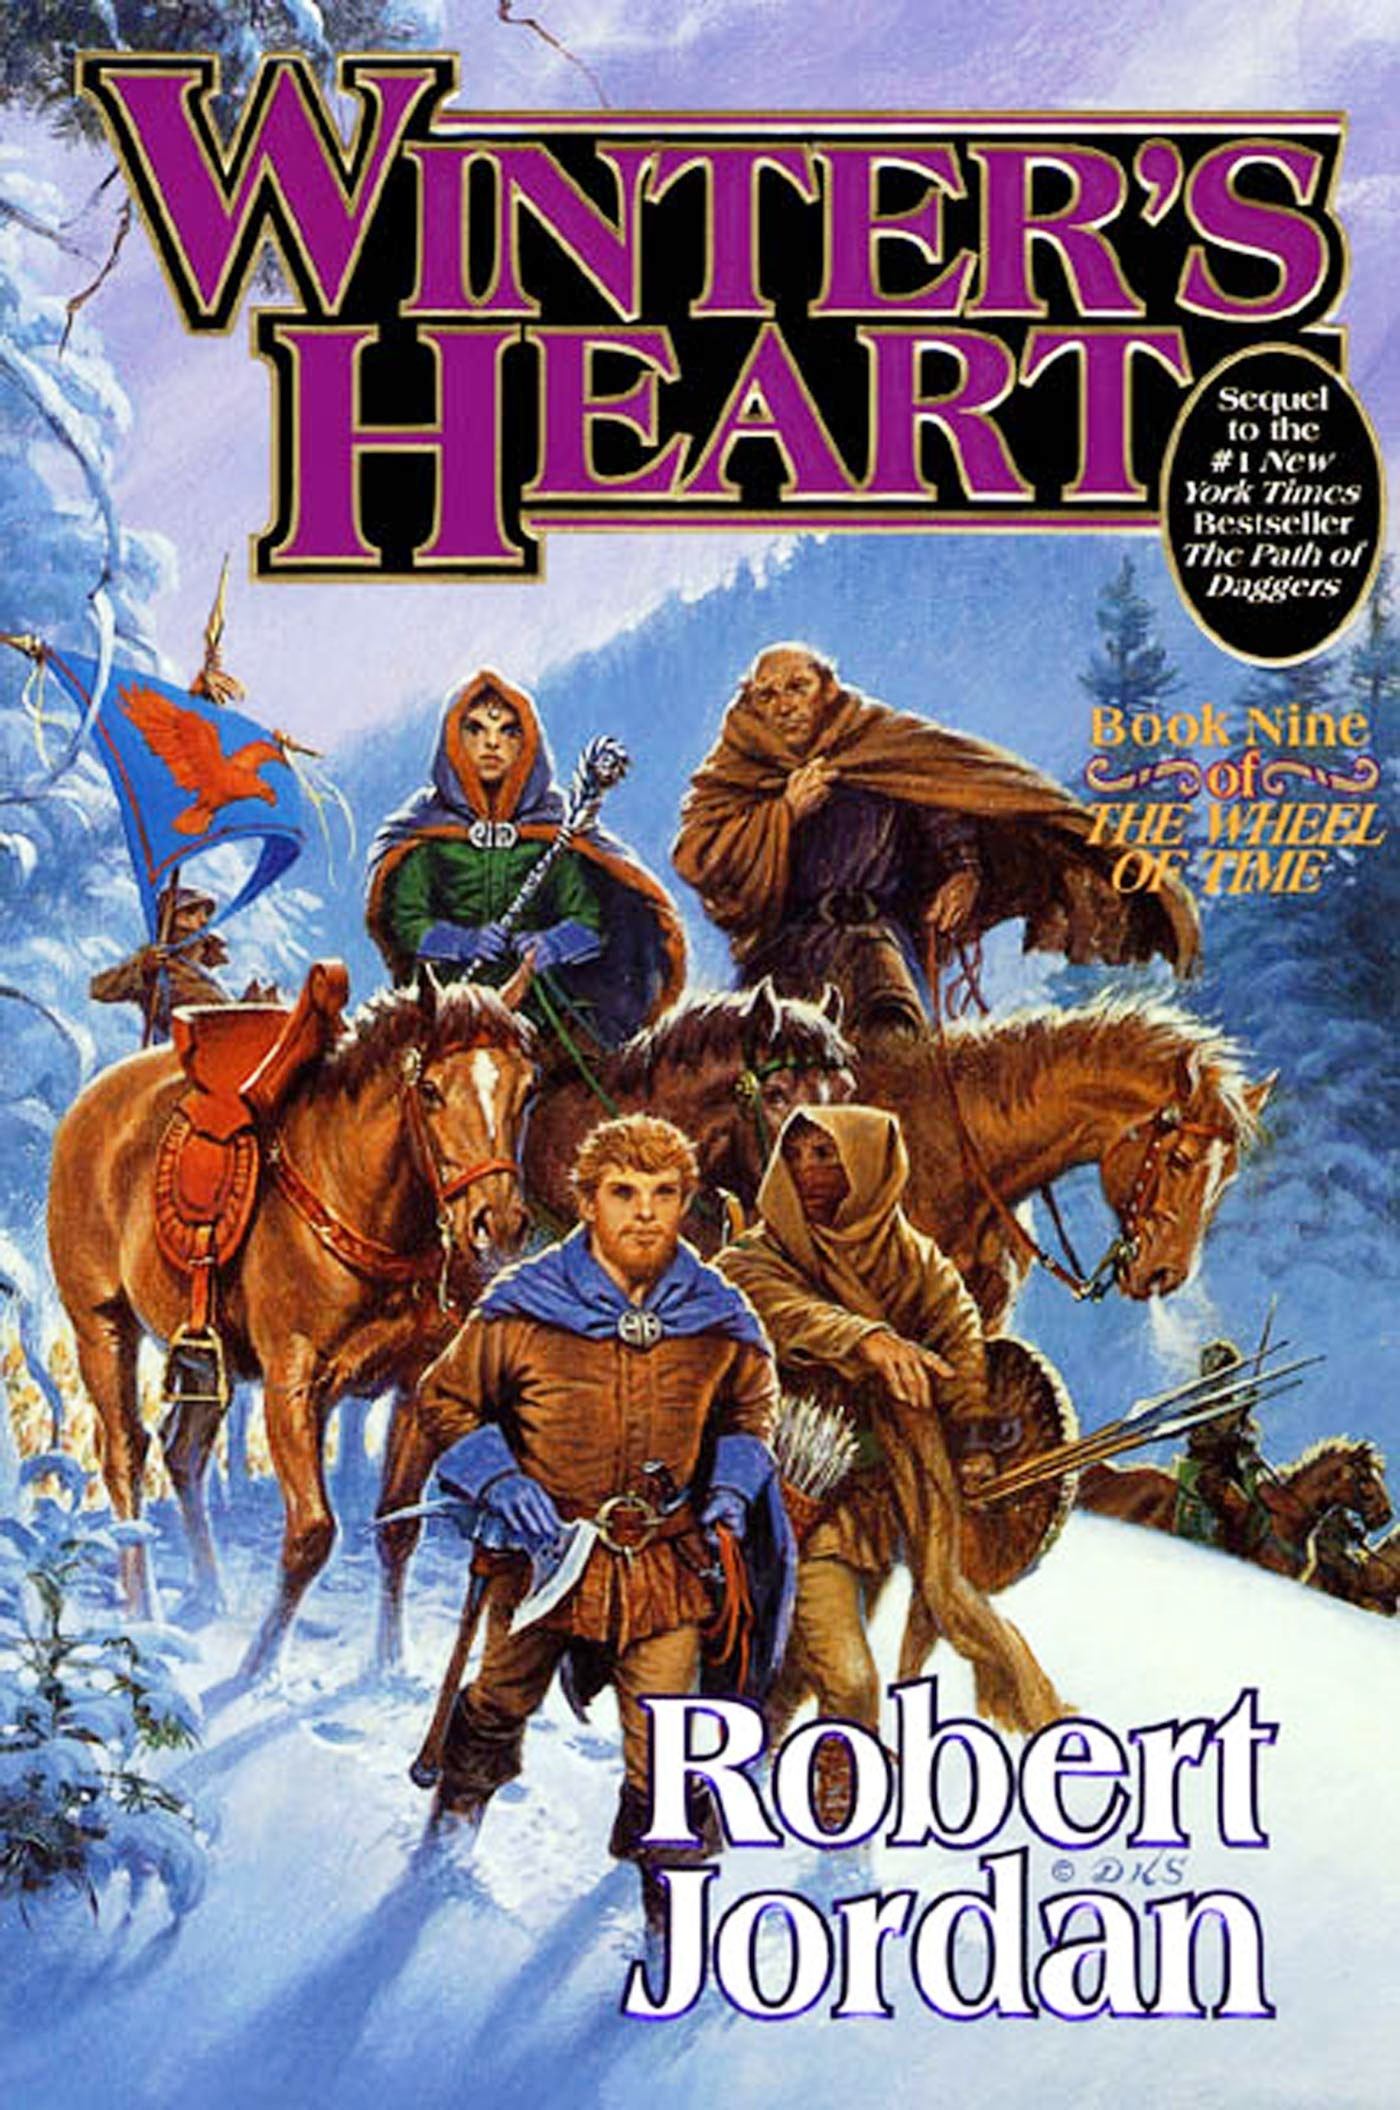 Winter's Heart - Wheel of Time-Book 9